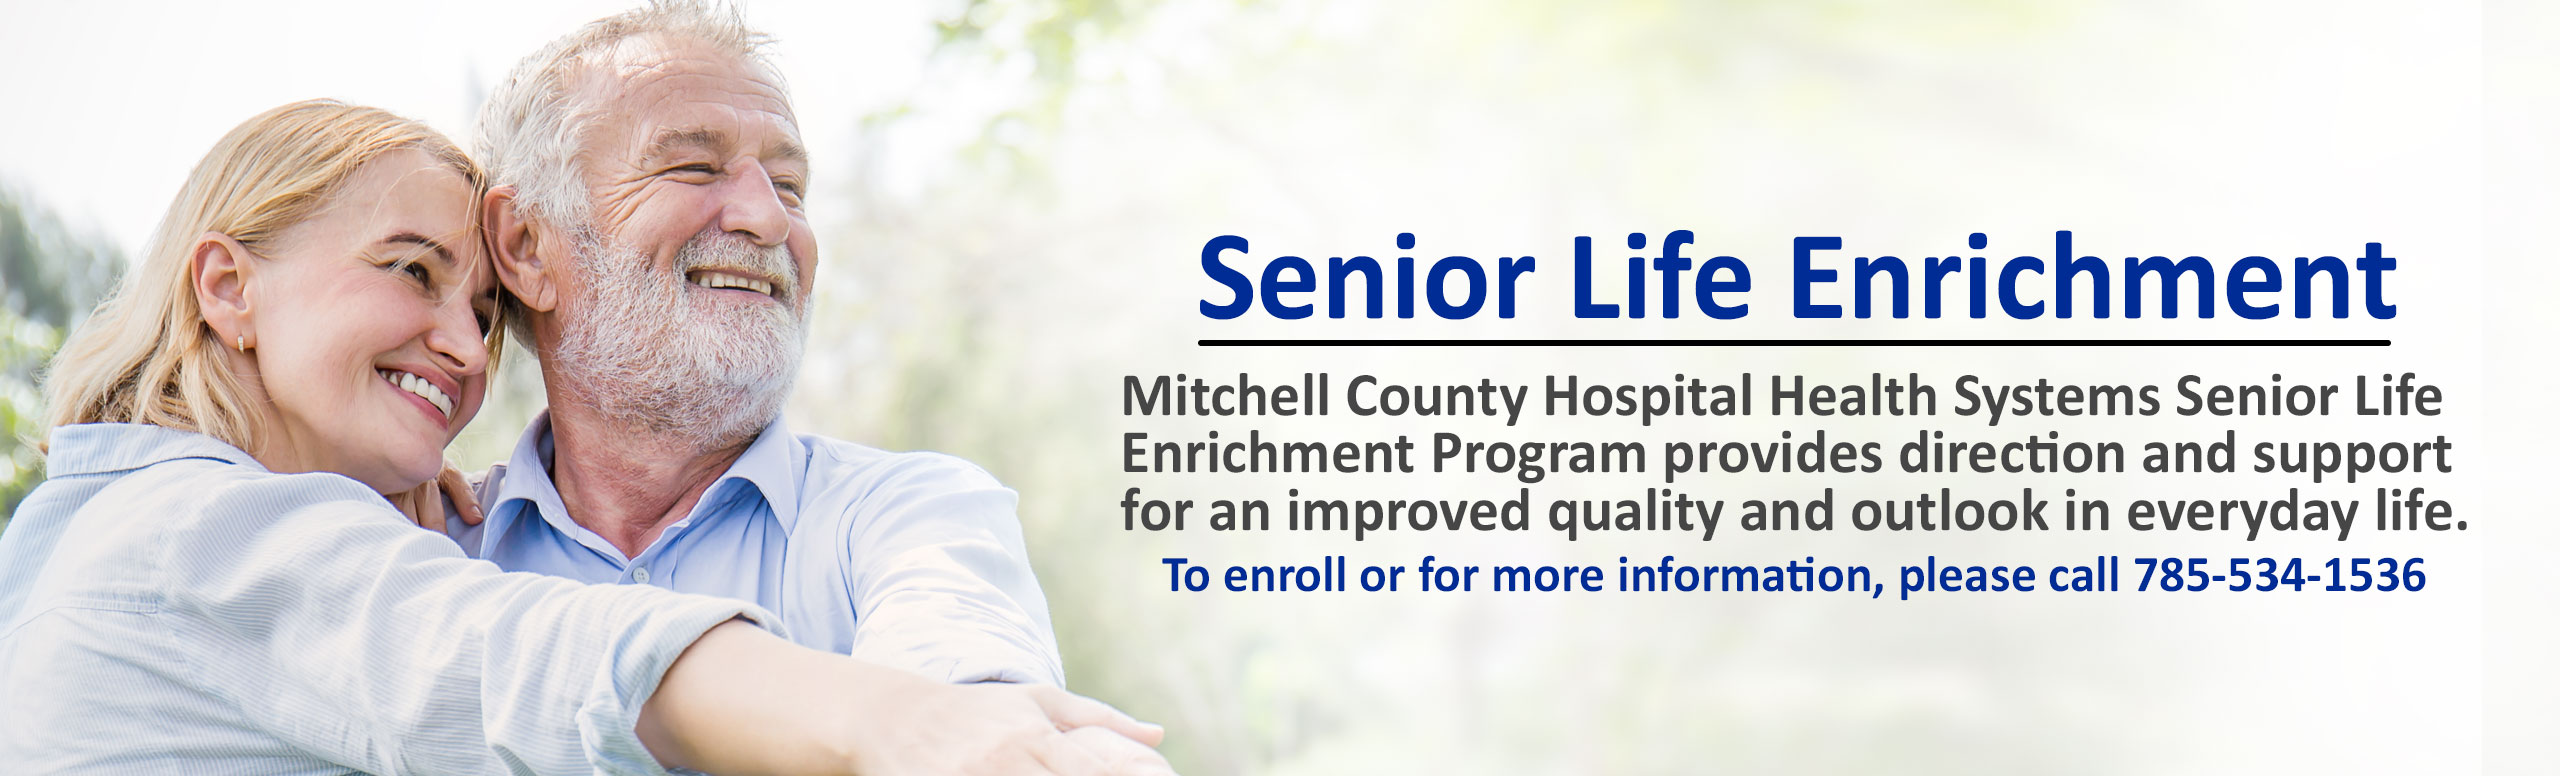 Banner picture of an older couple standing outside smiling.
Banner says:

Senior Life Enrichment

Mitchell County Hospital Health System Senior Life Enrichment Program provides direction and support for an improved quality and outlook in everyday life.
To enroll or for more information, please call 785-534-1536